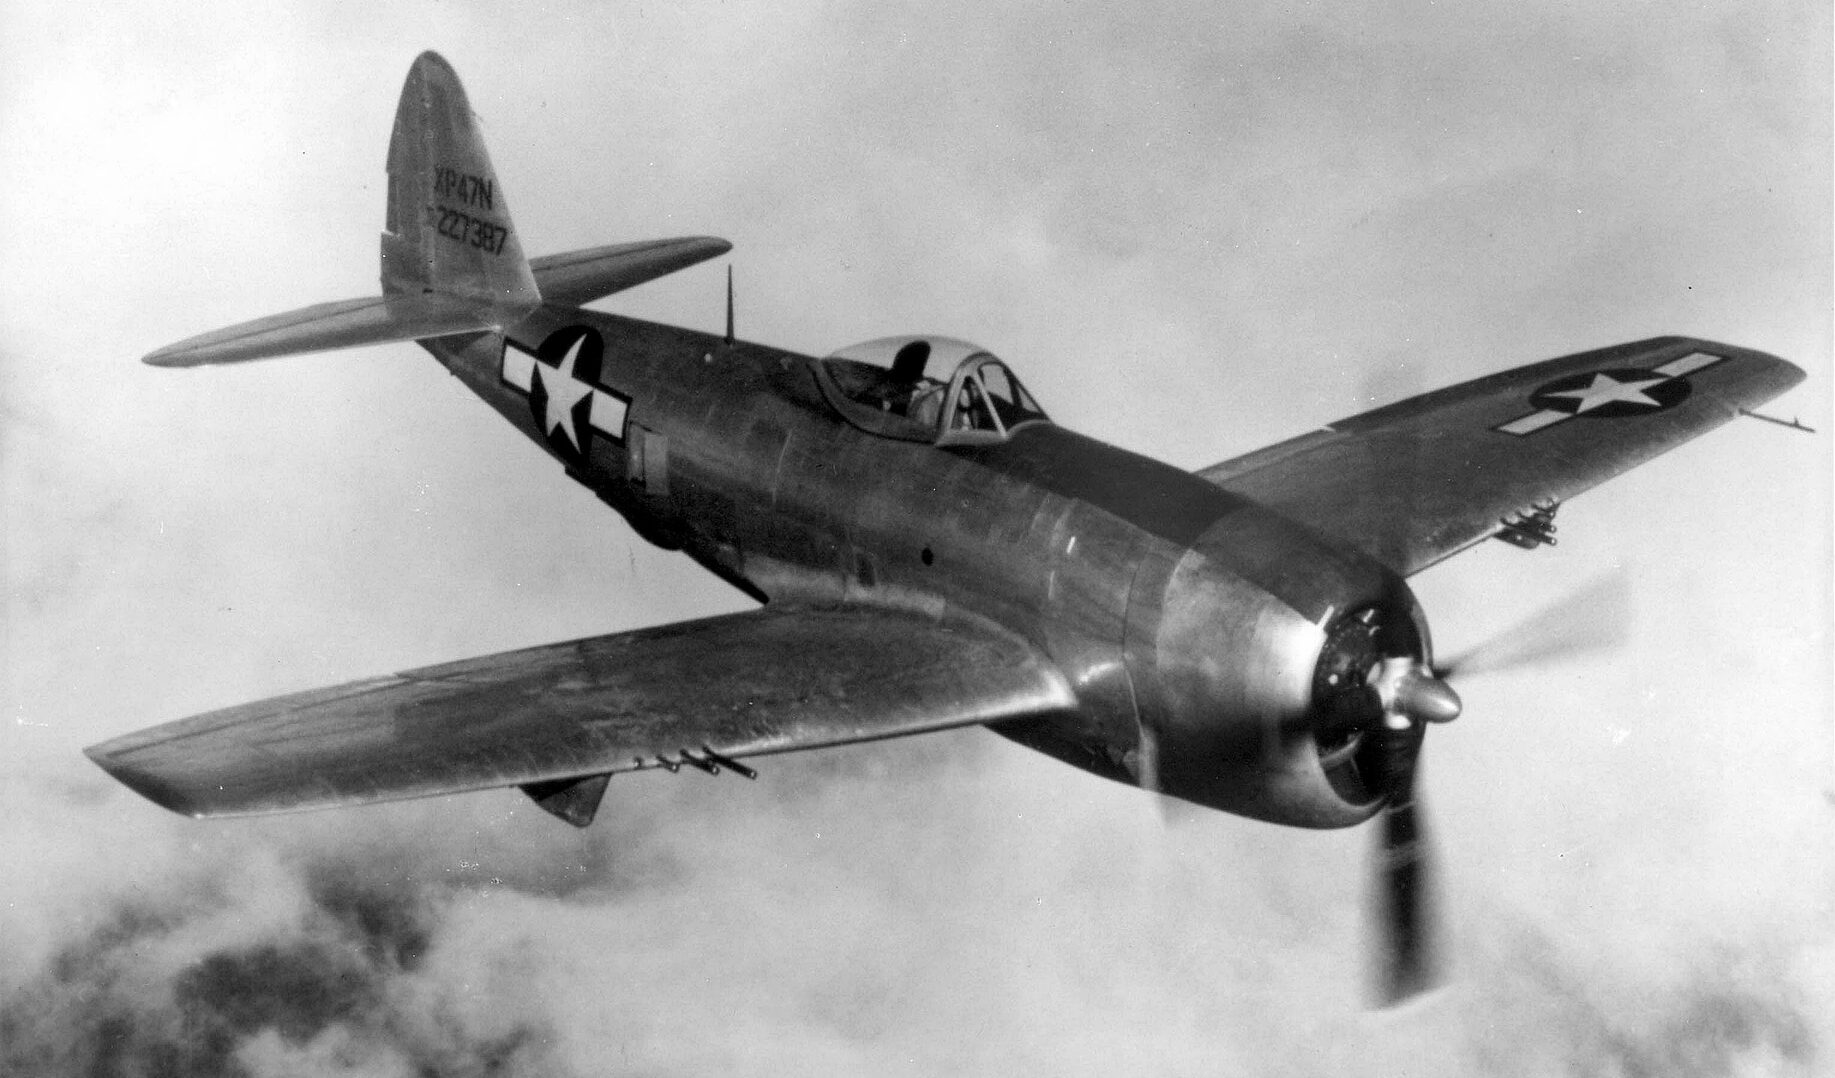 Used as both a high-altitude escort fighter and a low-level fighter-bomber, the P-47 quickly gained a reputation for ruggedness. Its sturdy construction and air-cooled radial engine enabled the Thunderbolt to absorb severe battle damage and keep flying. 